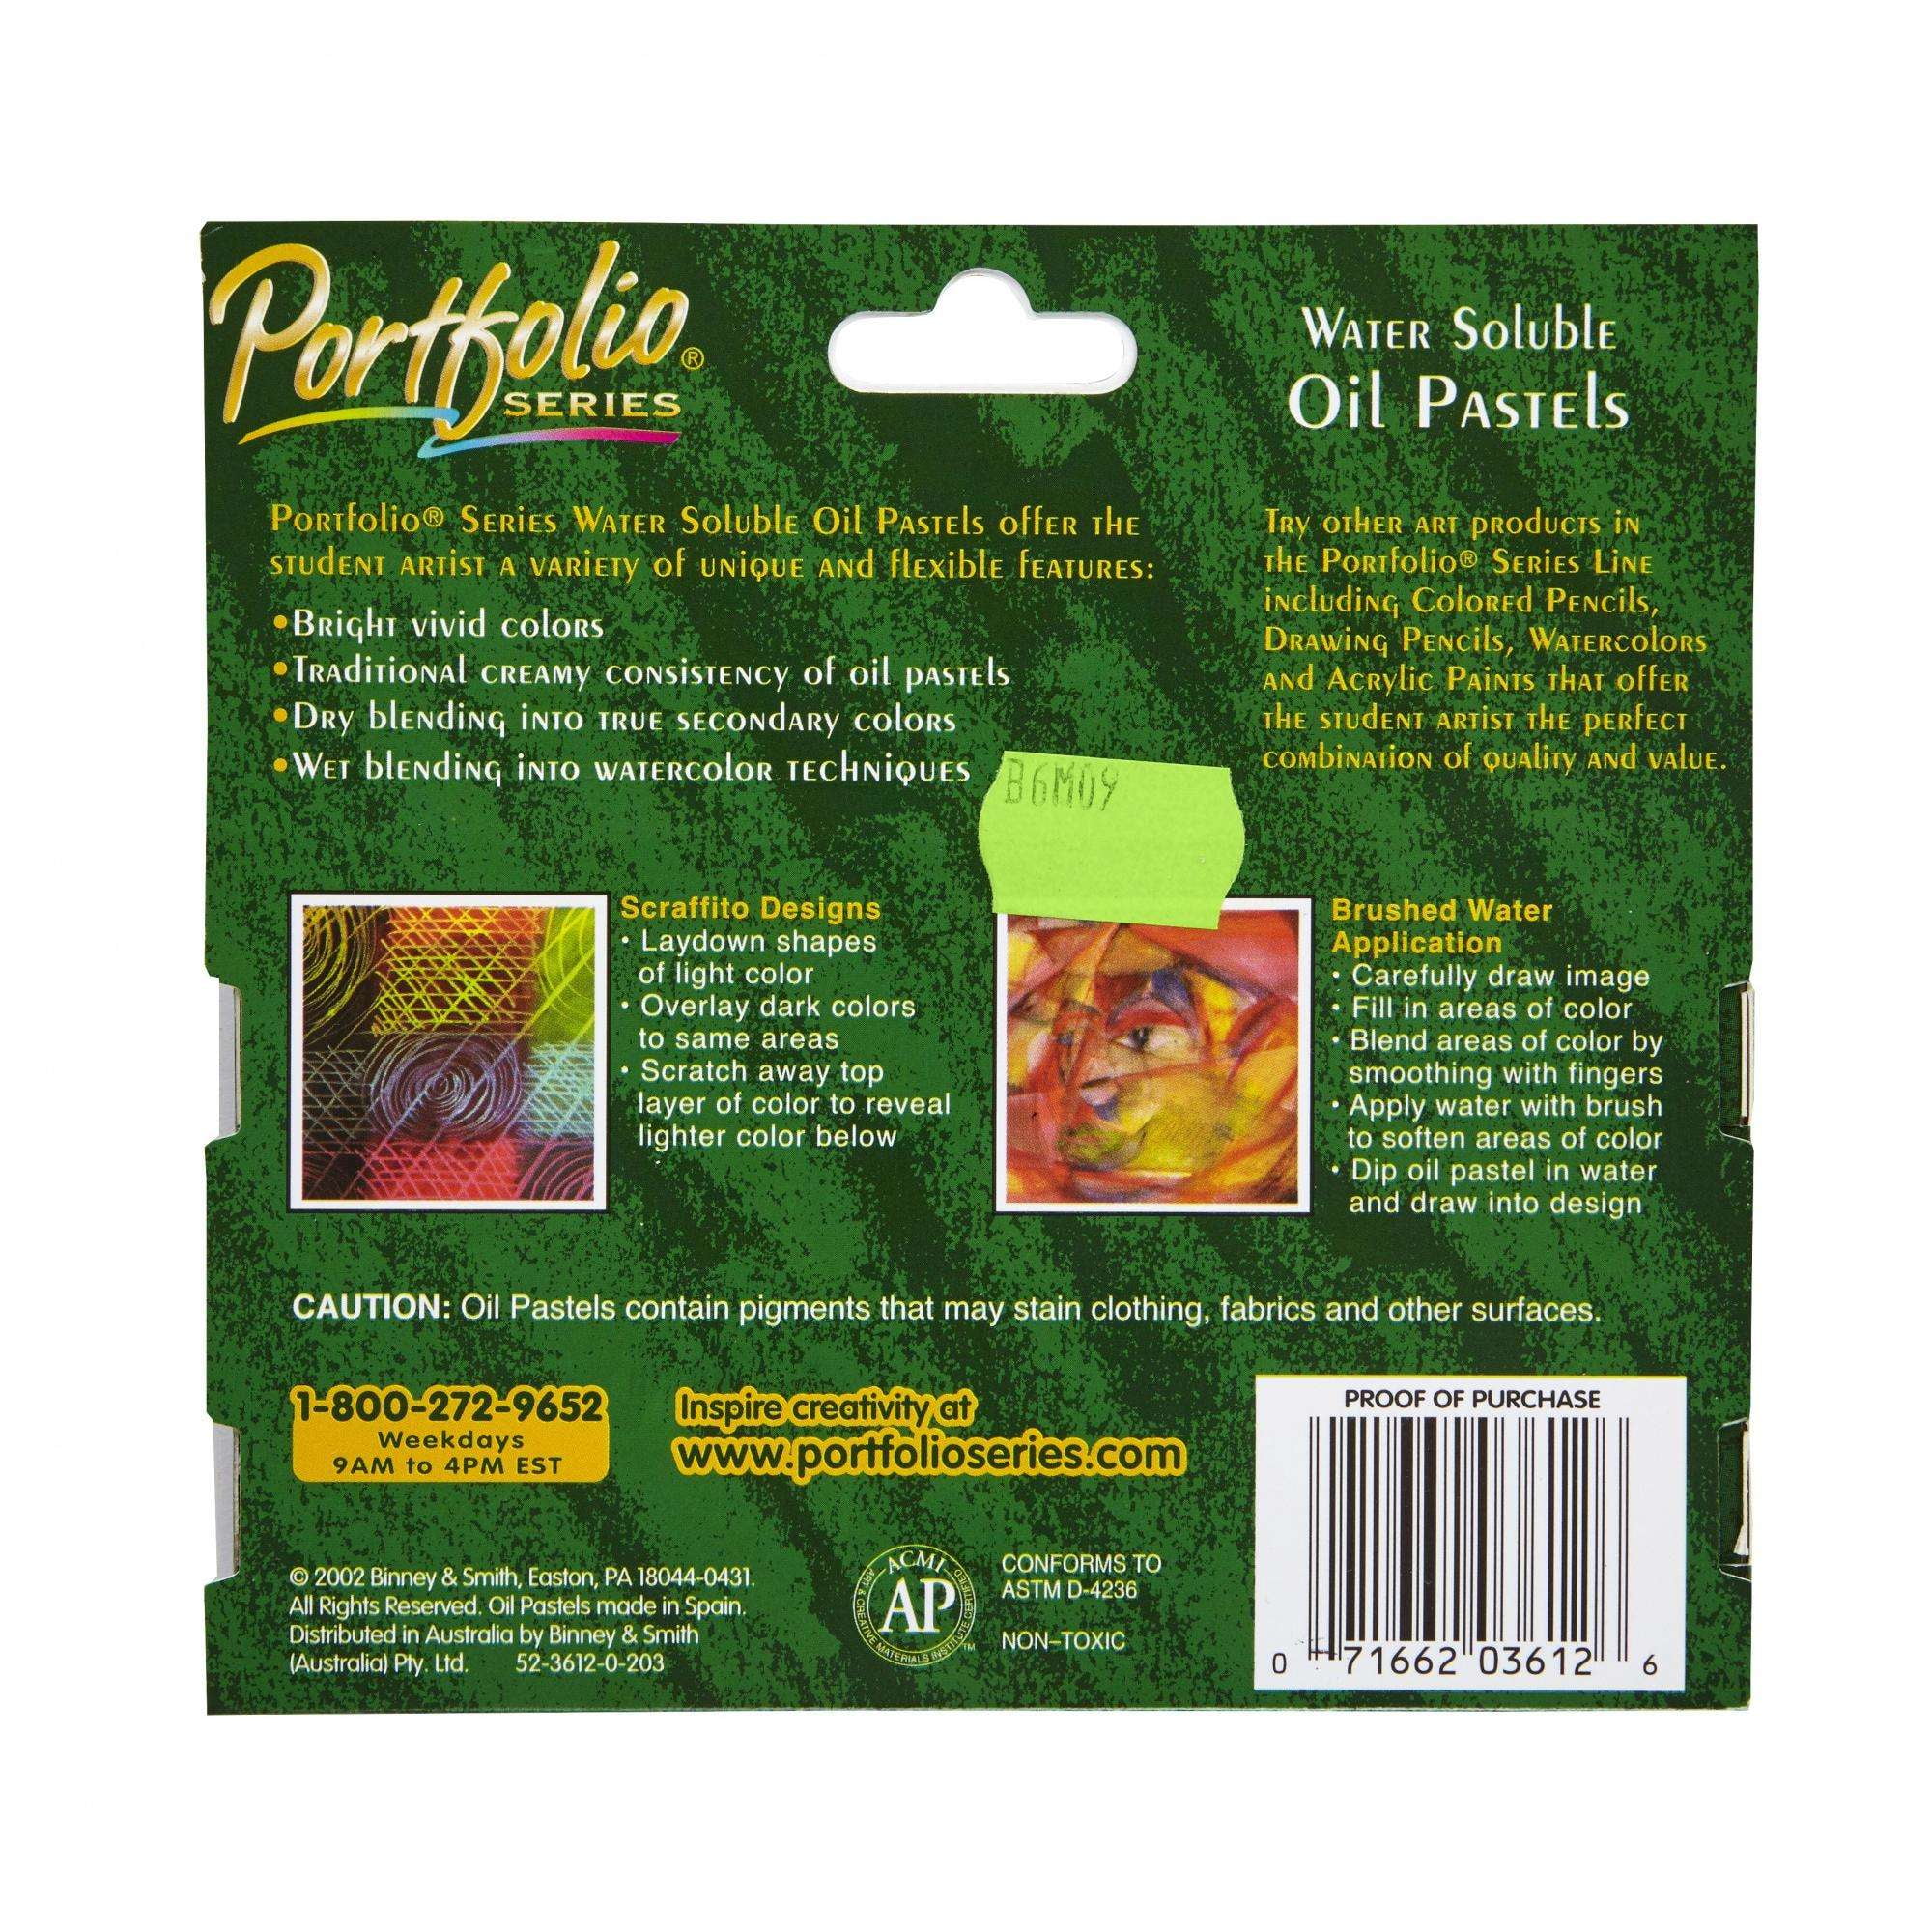 Portfolio Water Soluble Oil Pastels, 12 Colors - Artist & Craftsman Supply